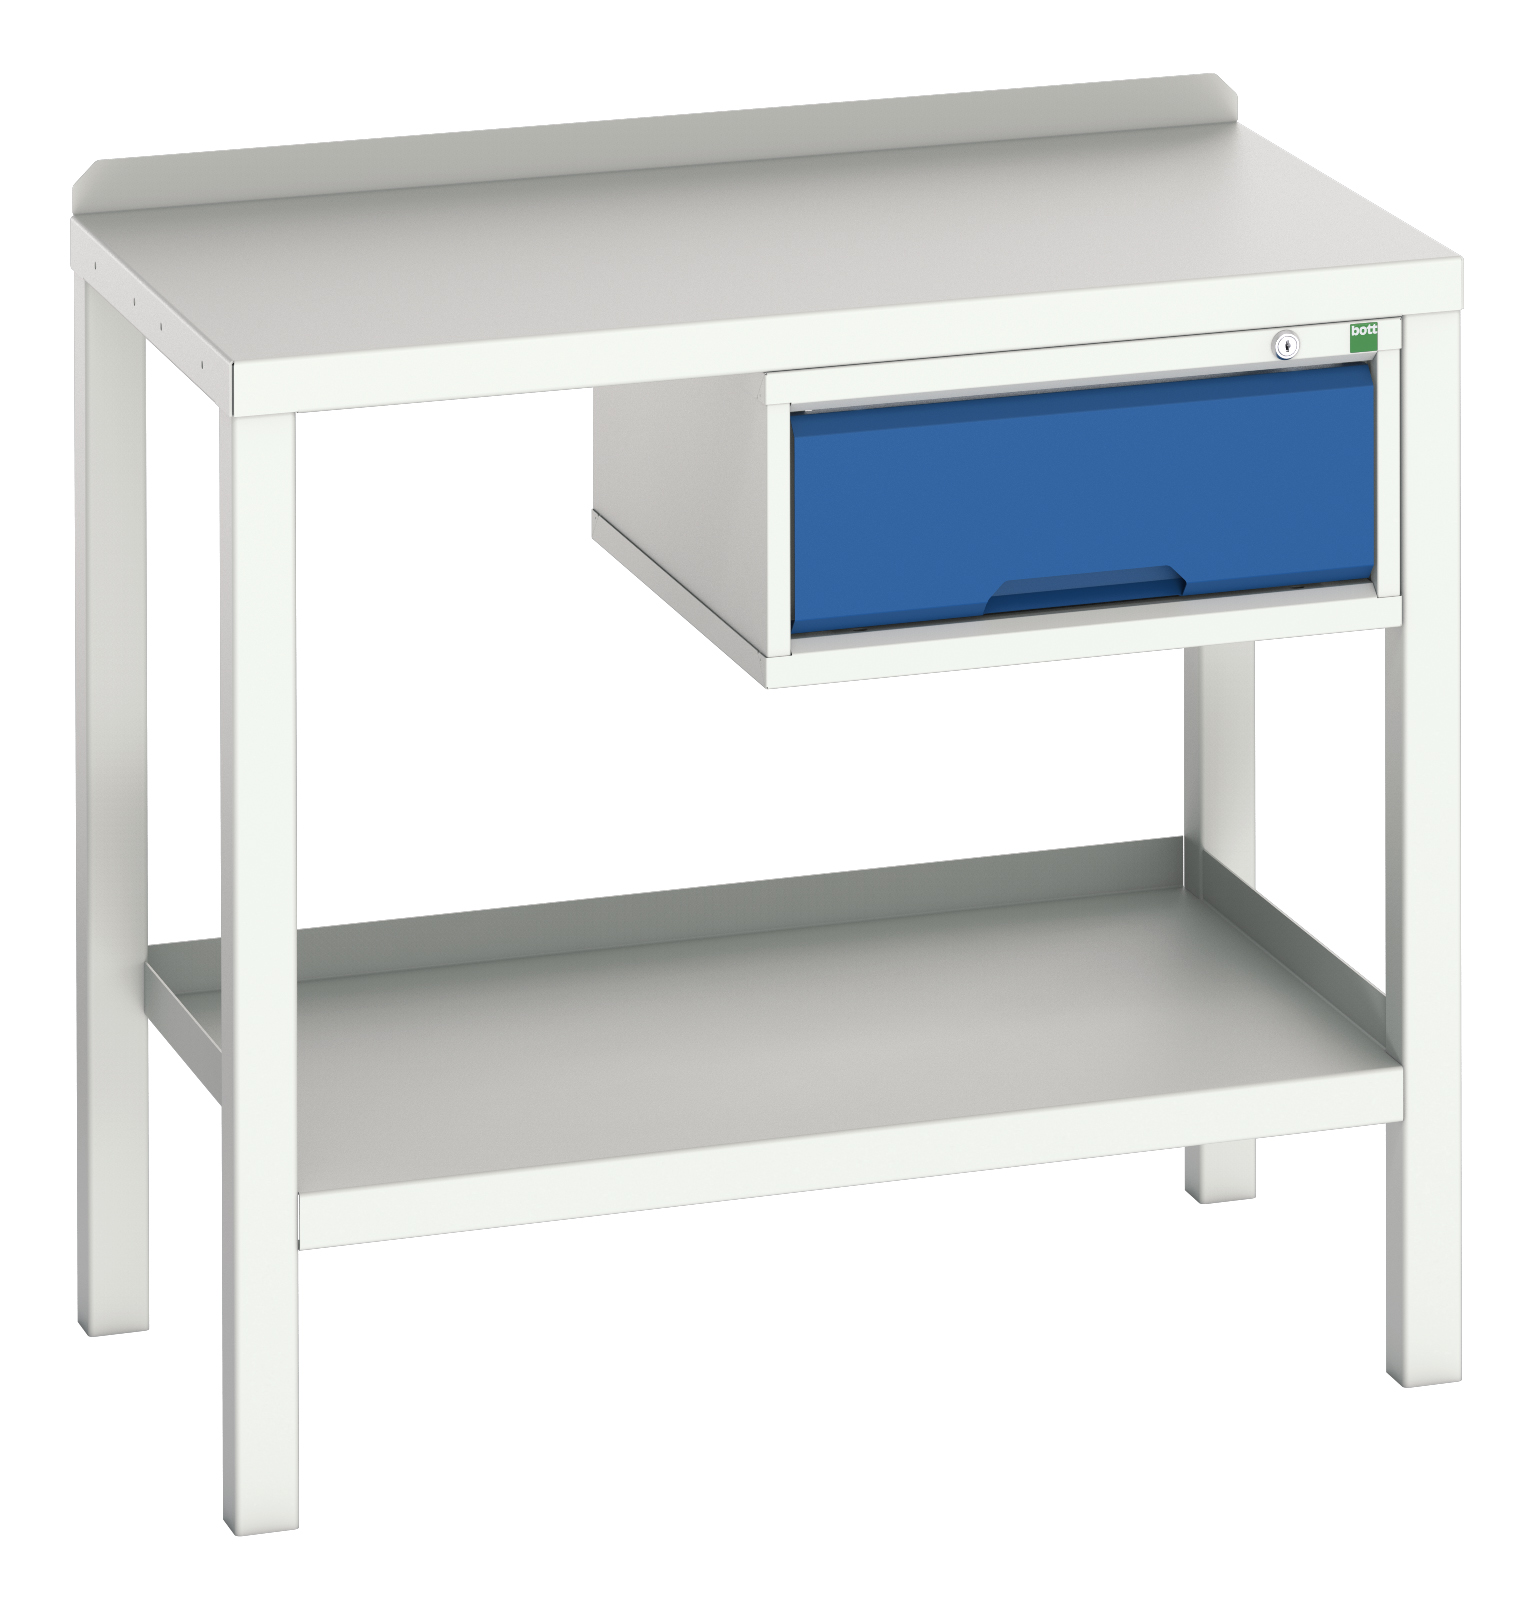 Bott Verso Welded Bench With 1 Drawer Cabinet - 16922600.11